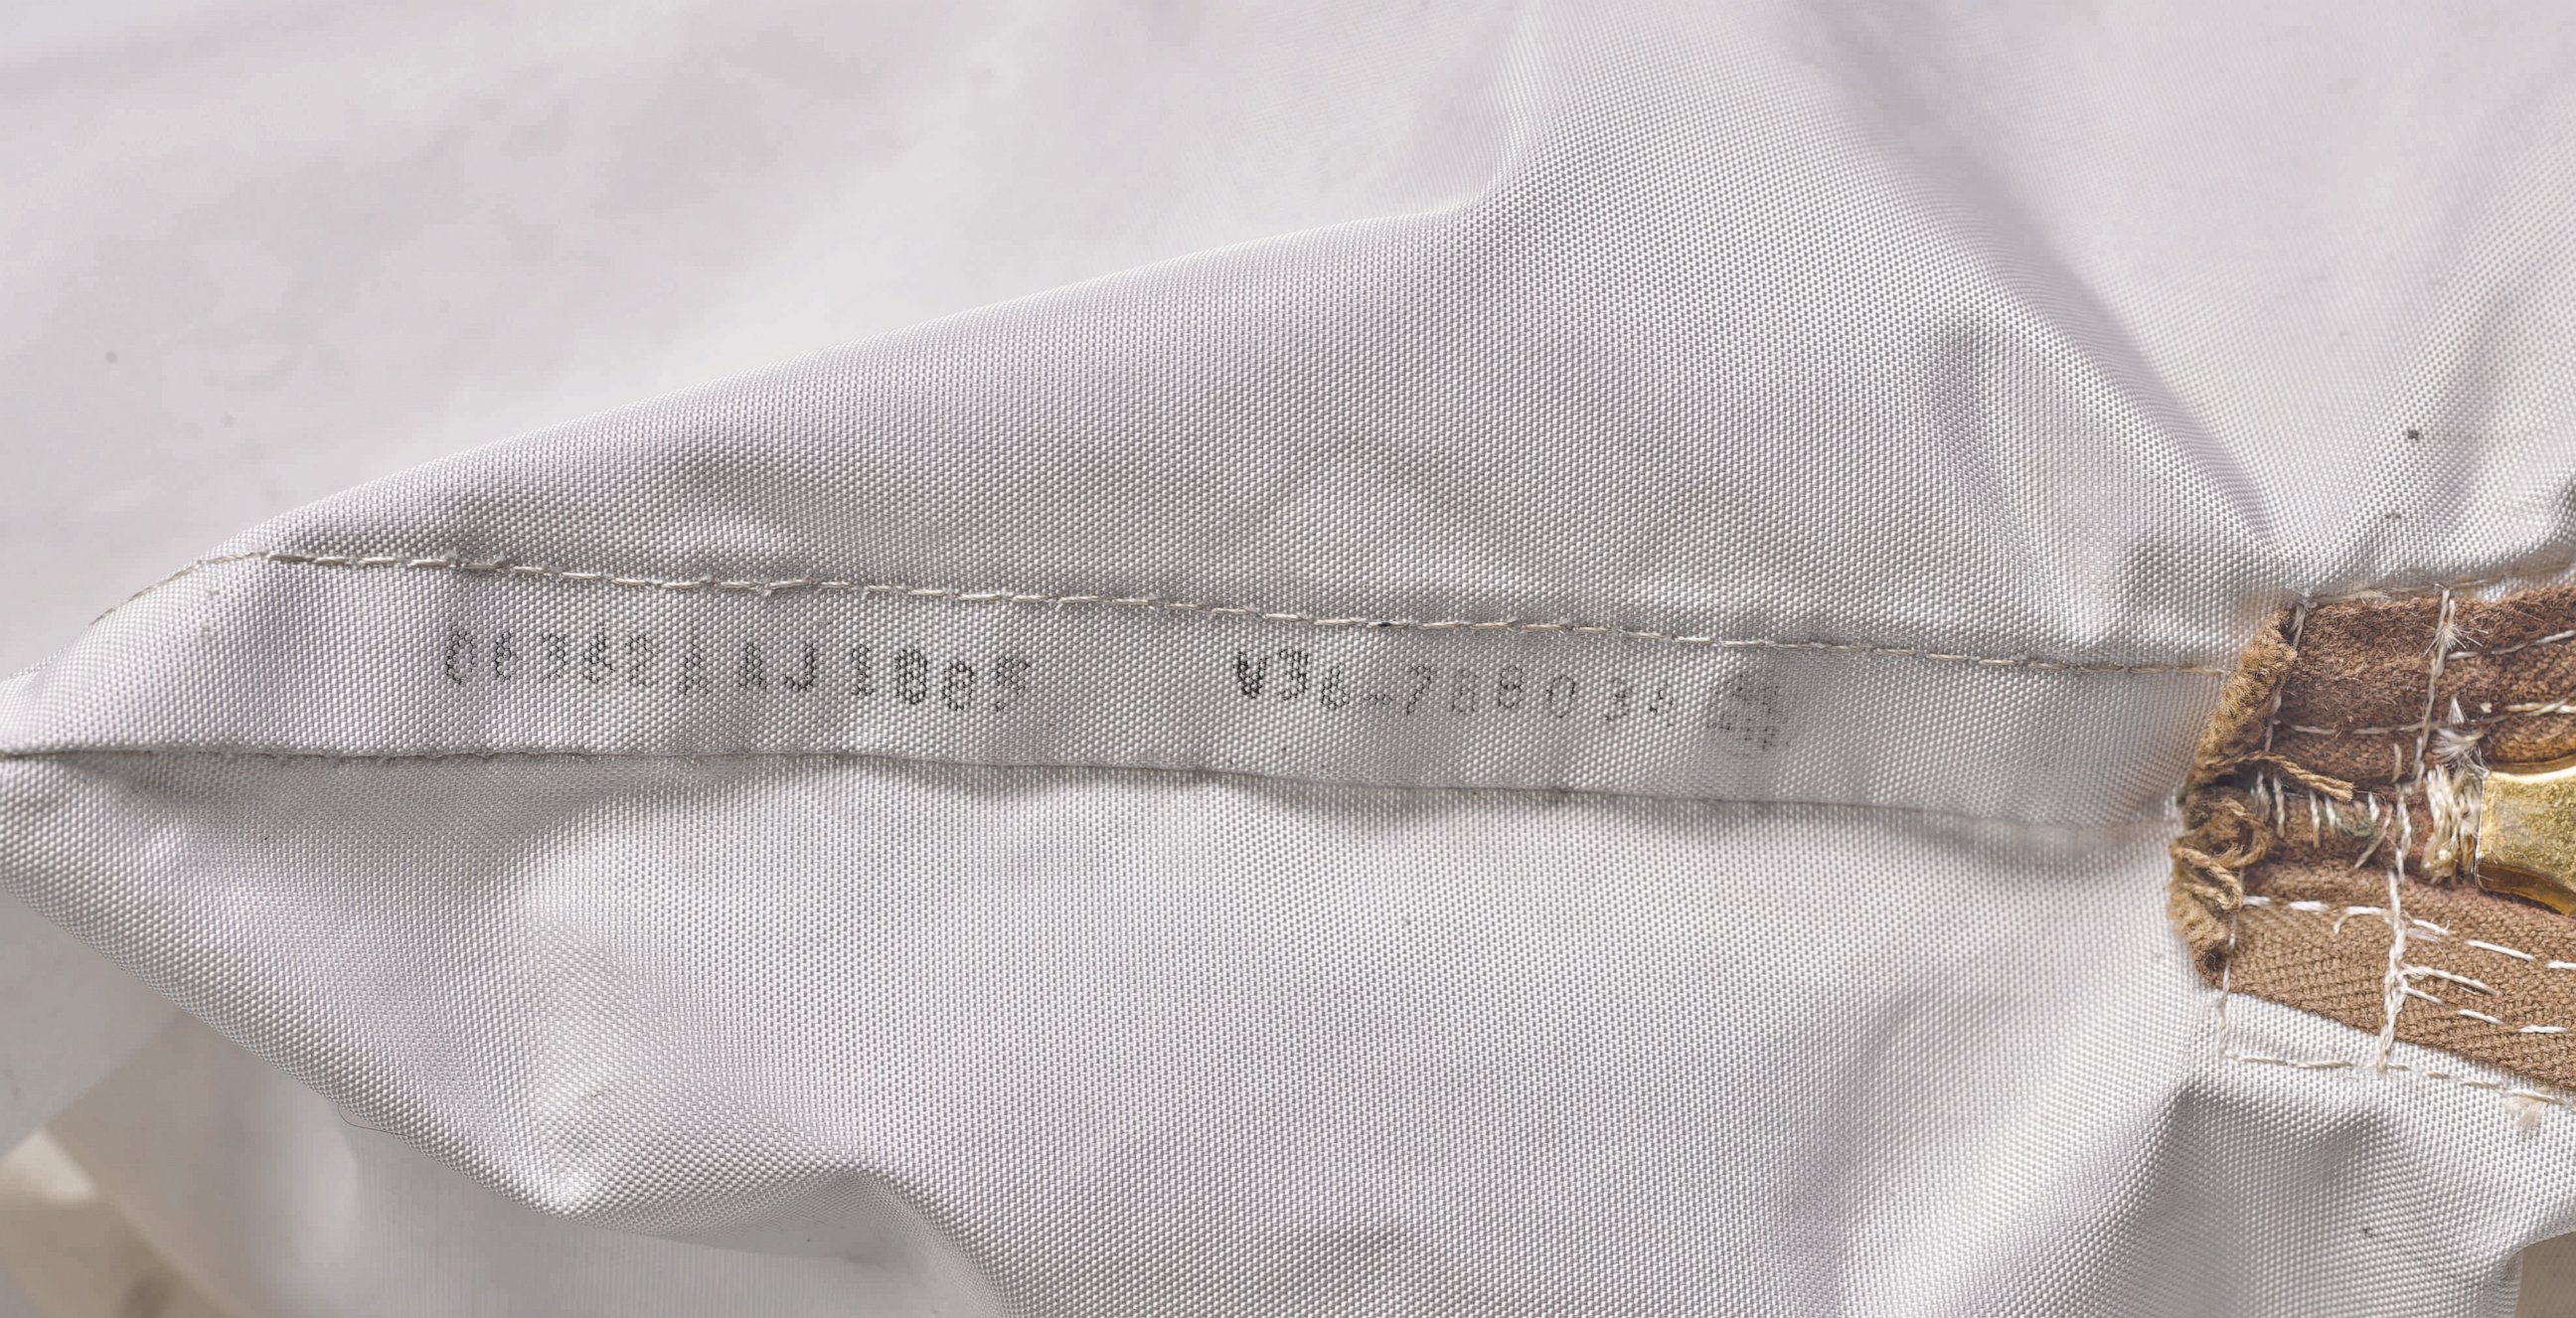 PHOTO: Serial number of the lunar sample bag from Apollo 11 that contains space dust.